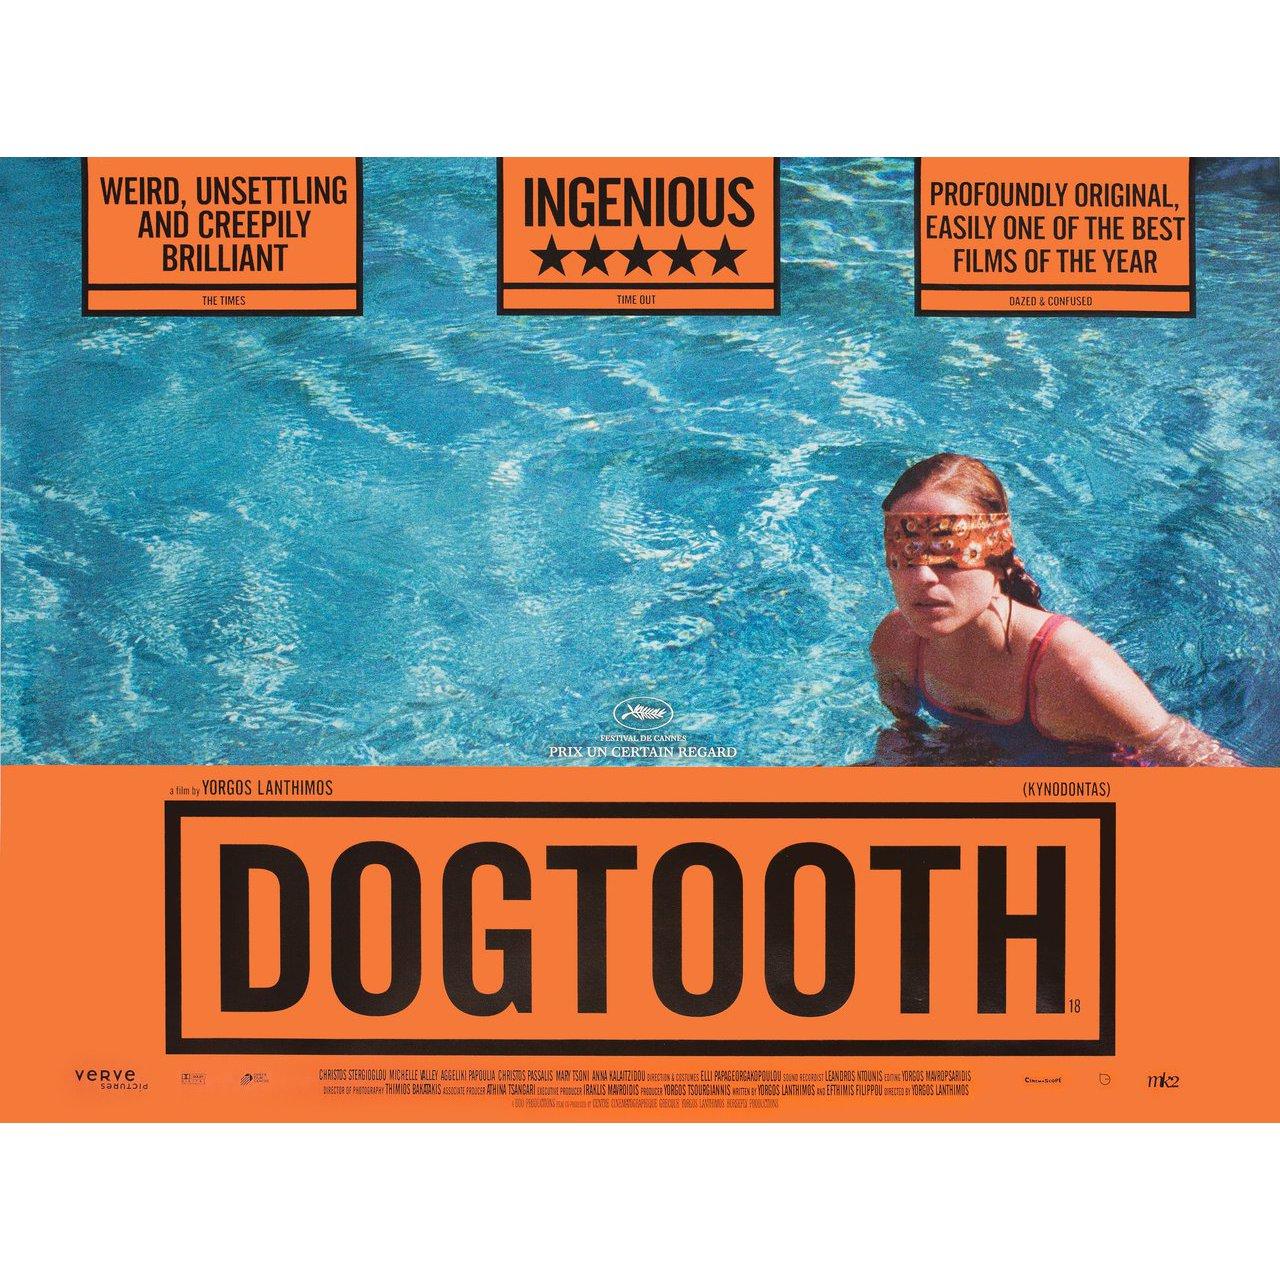 Original 2009 British quad poster for the film Dogtooth (Kynodontas) directed by Yorgos Lanthimos with Christos Stergioglou / Michele Valley / Aggeliki Papoulia / Hristos Passalis. Very Good-Fine condition, rolled with edge wear. Please note: the